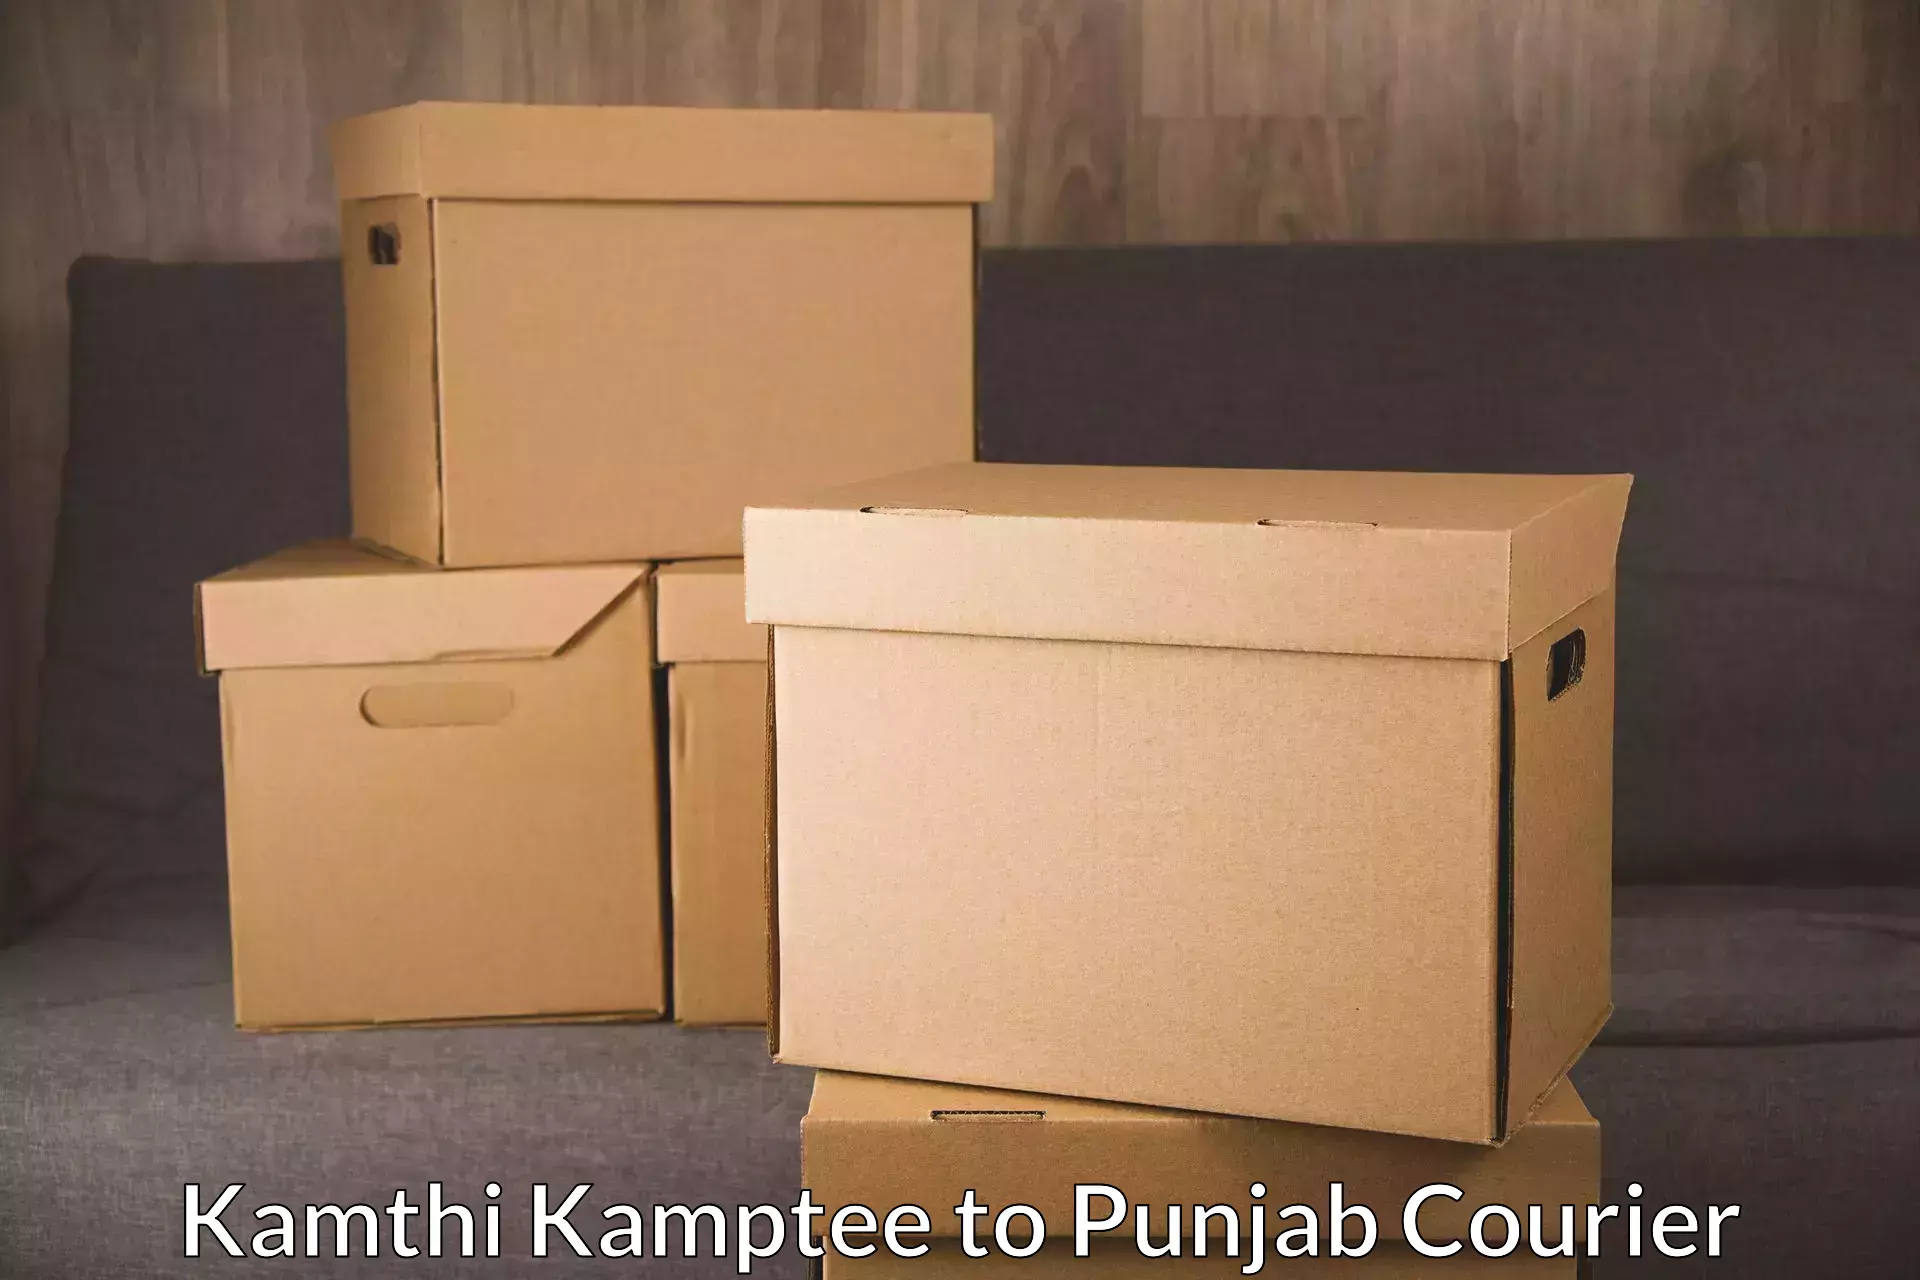 Reliable courier service Kamthi Kamptee to Amritsar